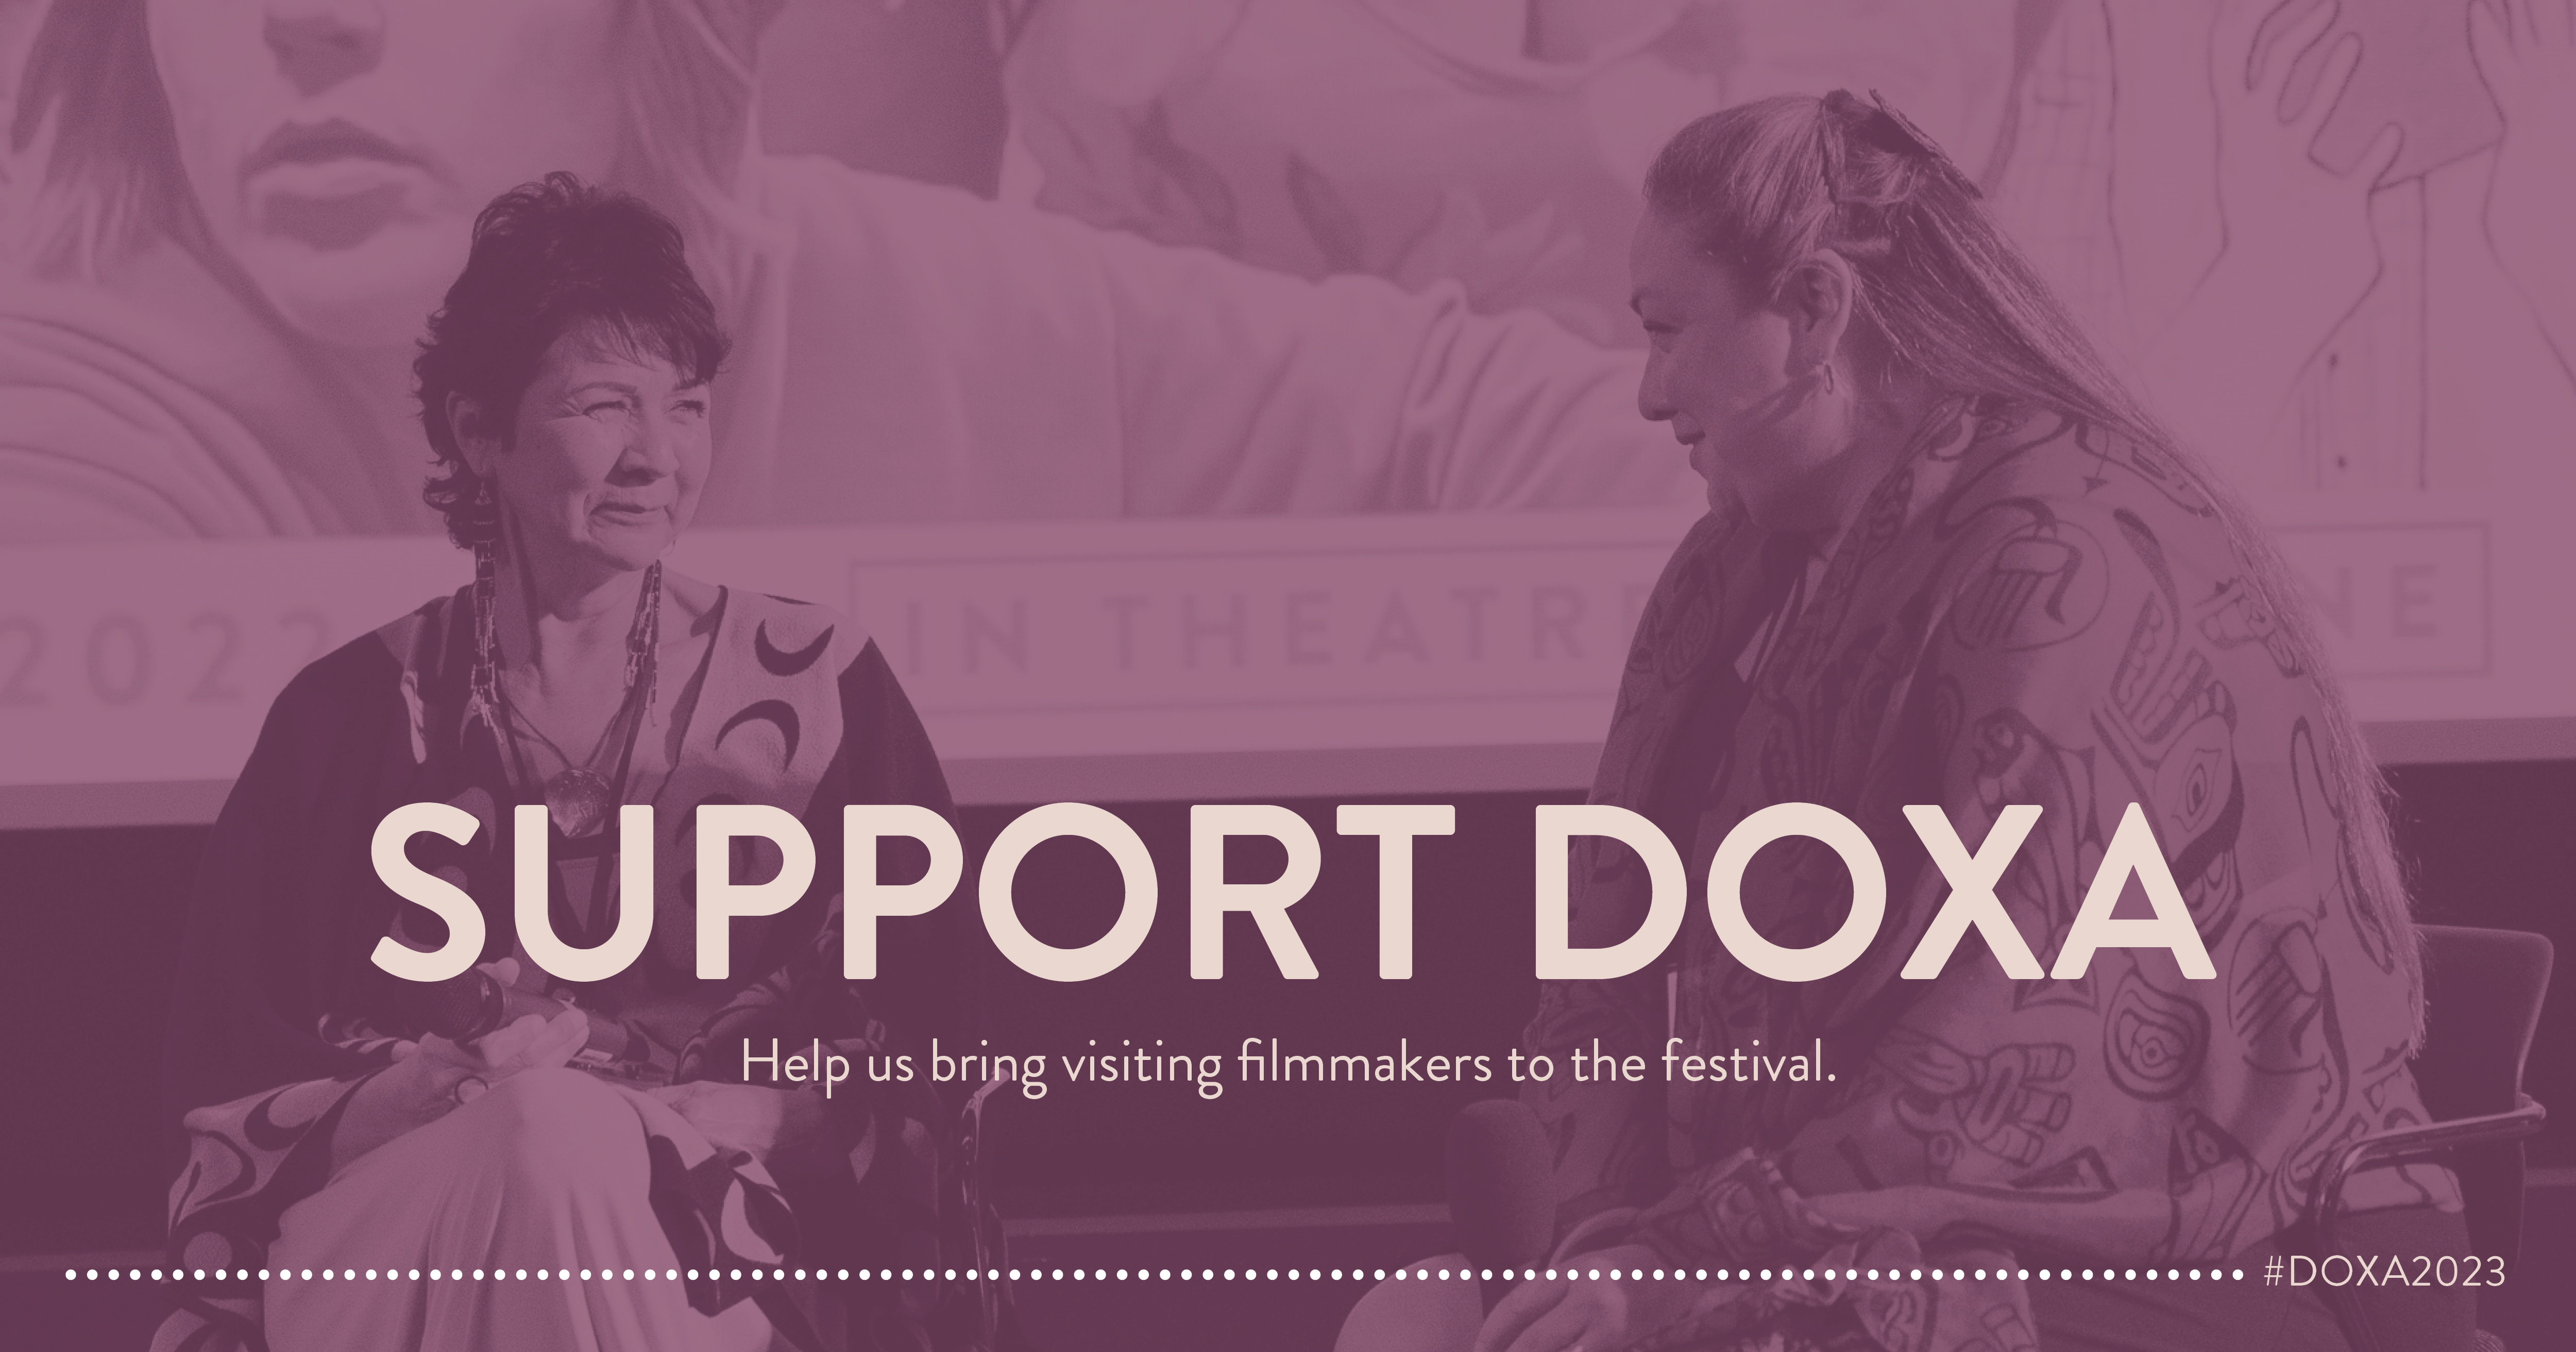 Photo of two women facing each other and smiling, sitting in front of a theatre screen. The image is tinted a mauve-purple, with text overlaid that reads: SUPPORT DOXA Help us bring visiting filmmakers to the festival.